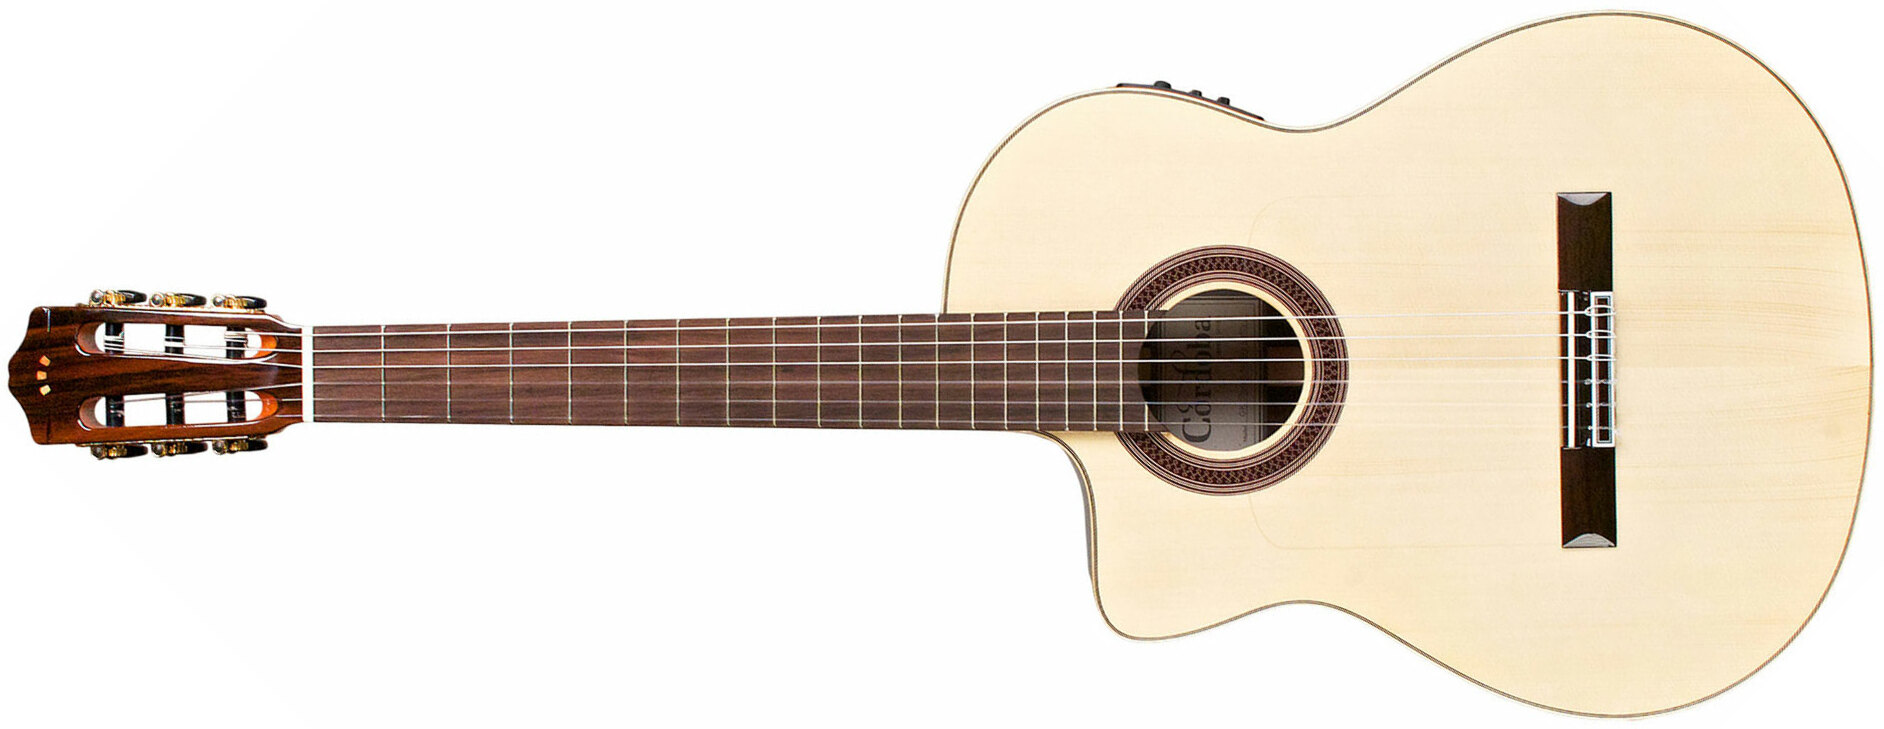 Cordoba Gipsy Kings Gk Studio Negra Lh Gaucher Cw Epicea Palissandre Rw - Natural - Classical guitar 4/4 size - Main picture